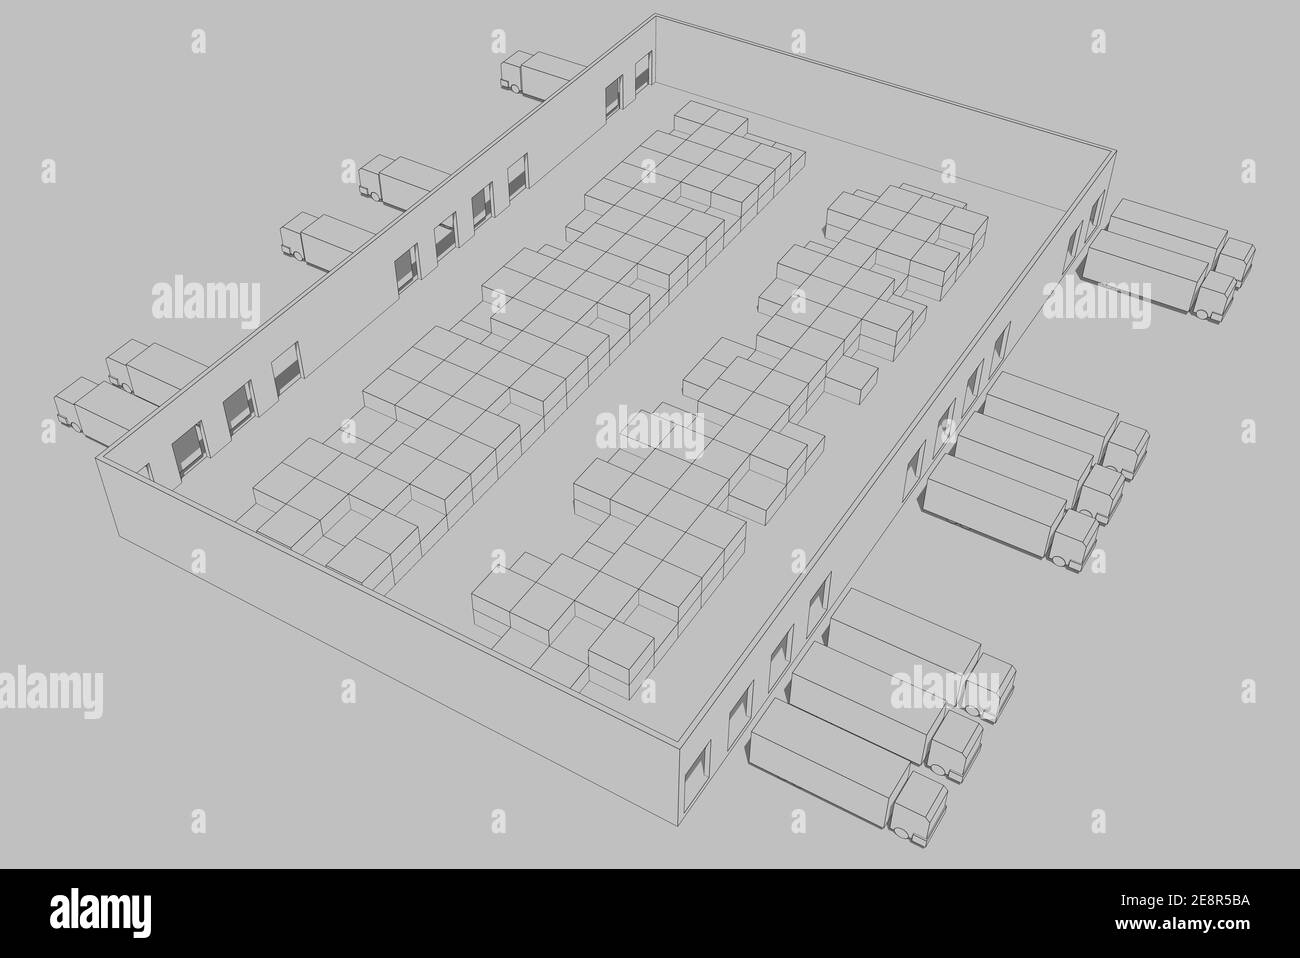 Warehouse 3D illustration of logistics transport and delivery vehicles. Stock Photo